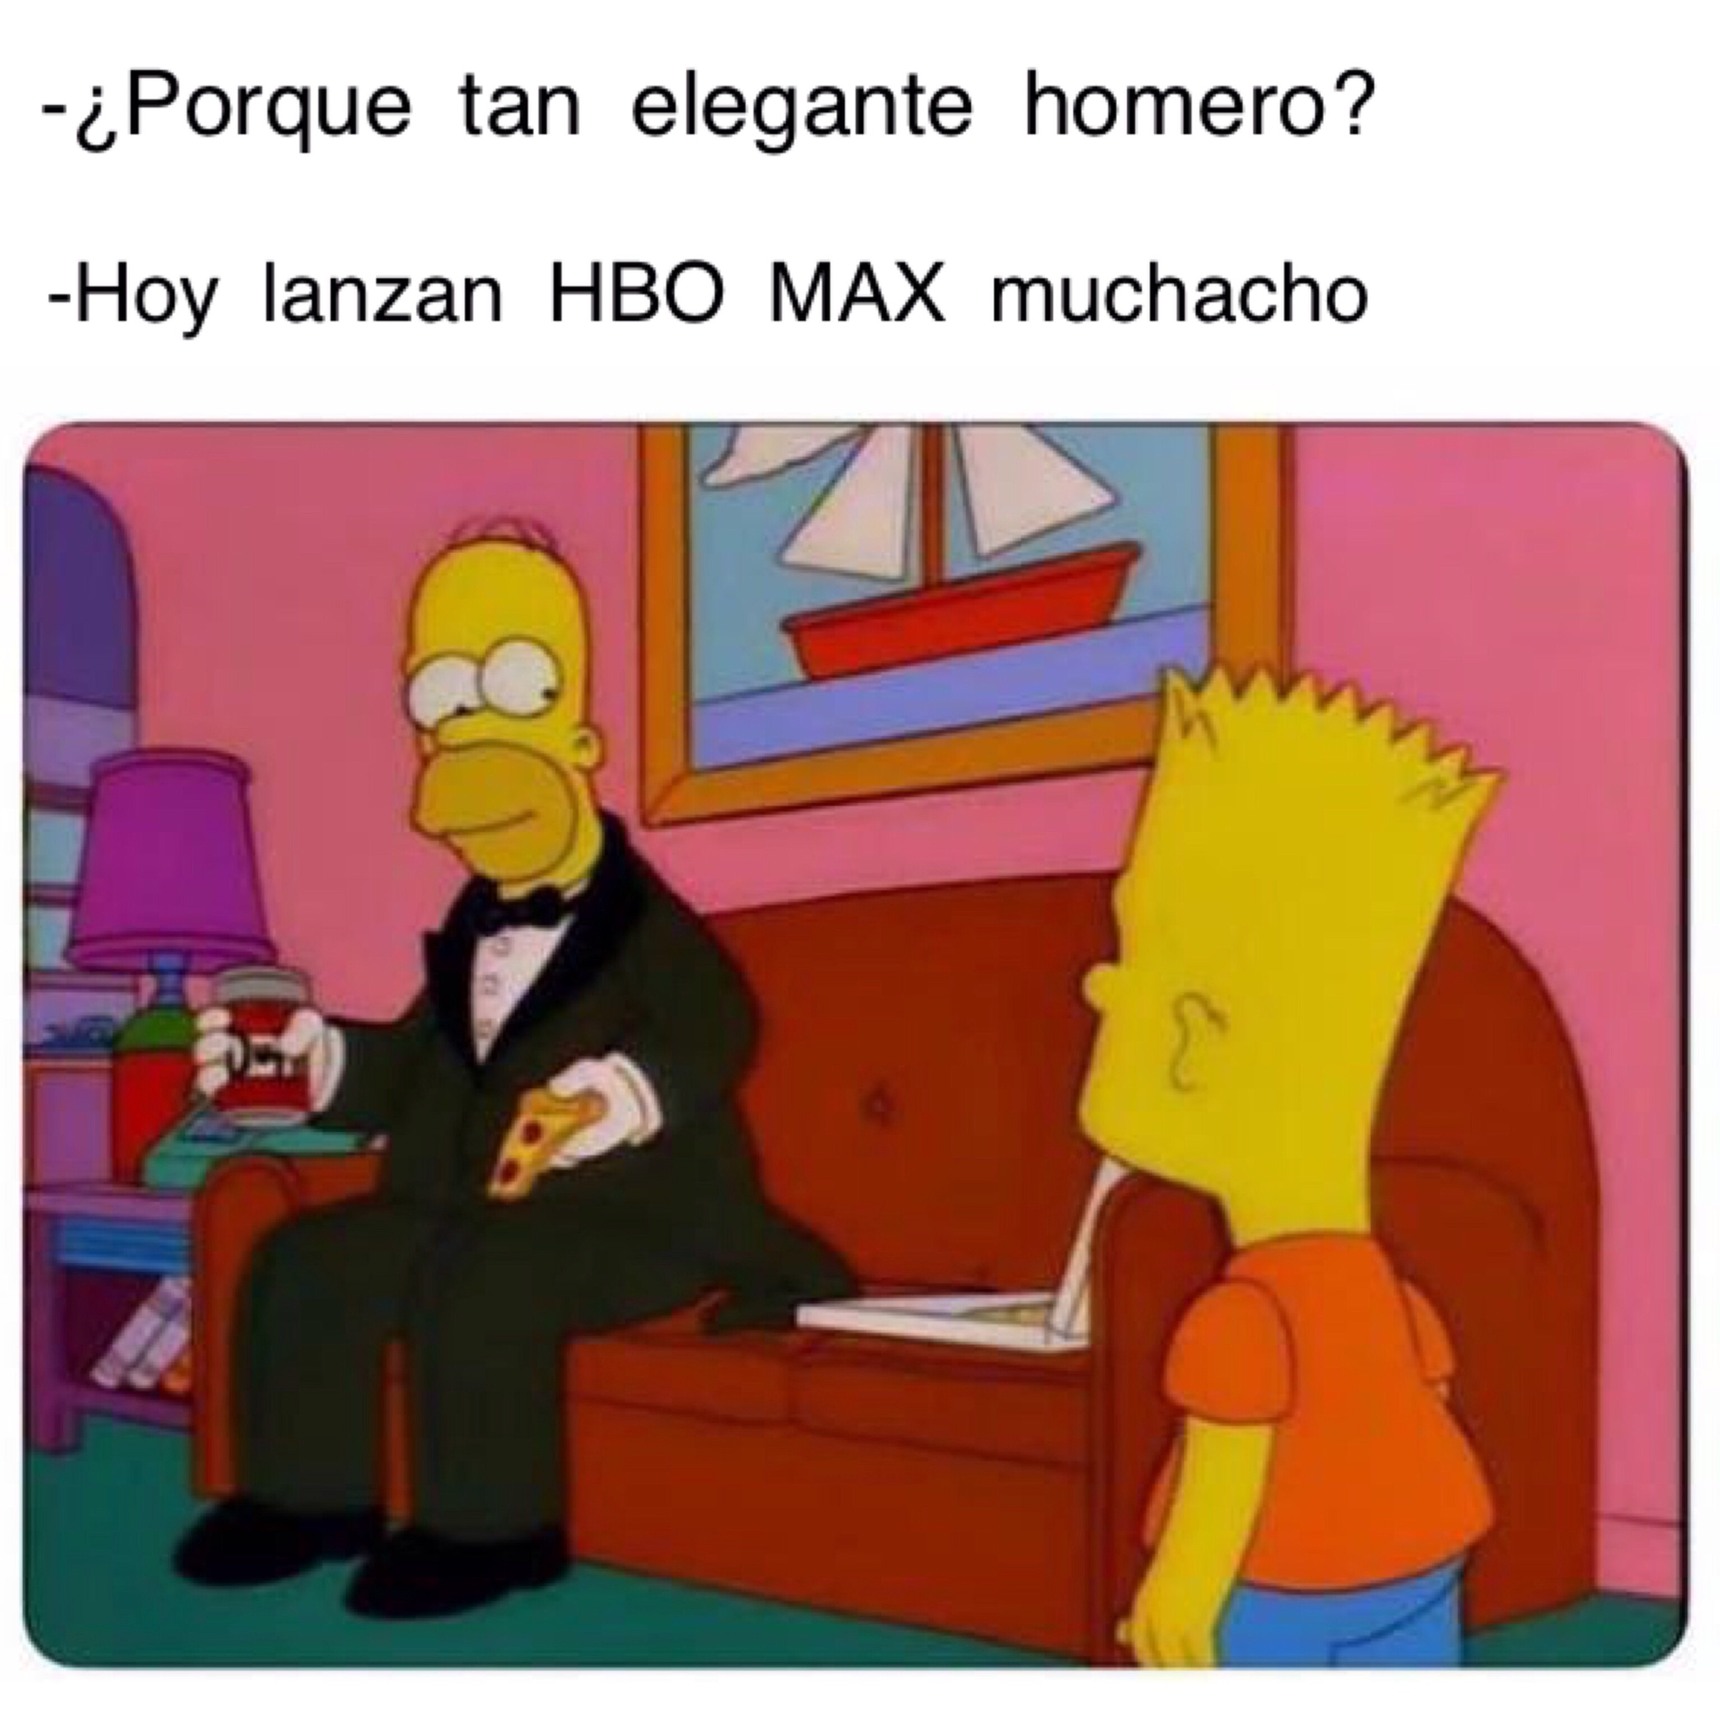 Ustedes son muy incultos - meme